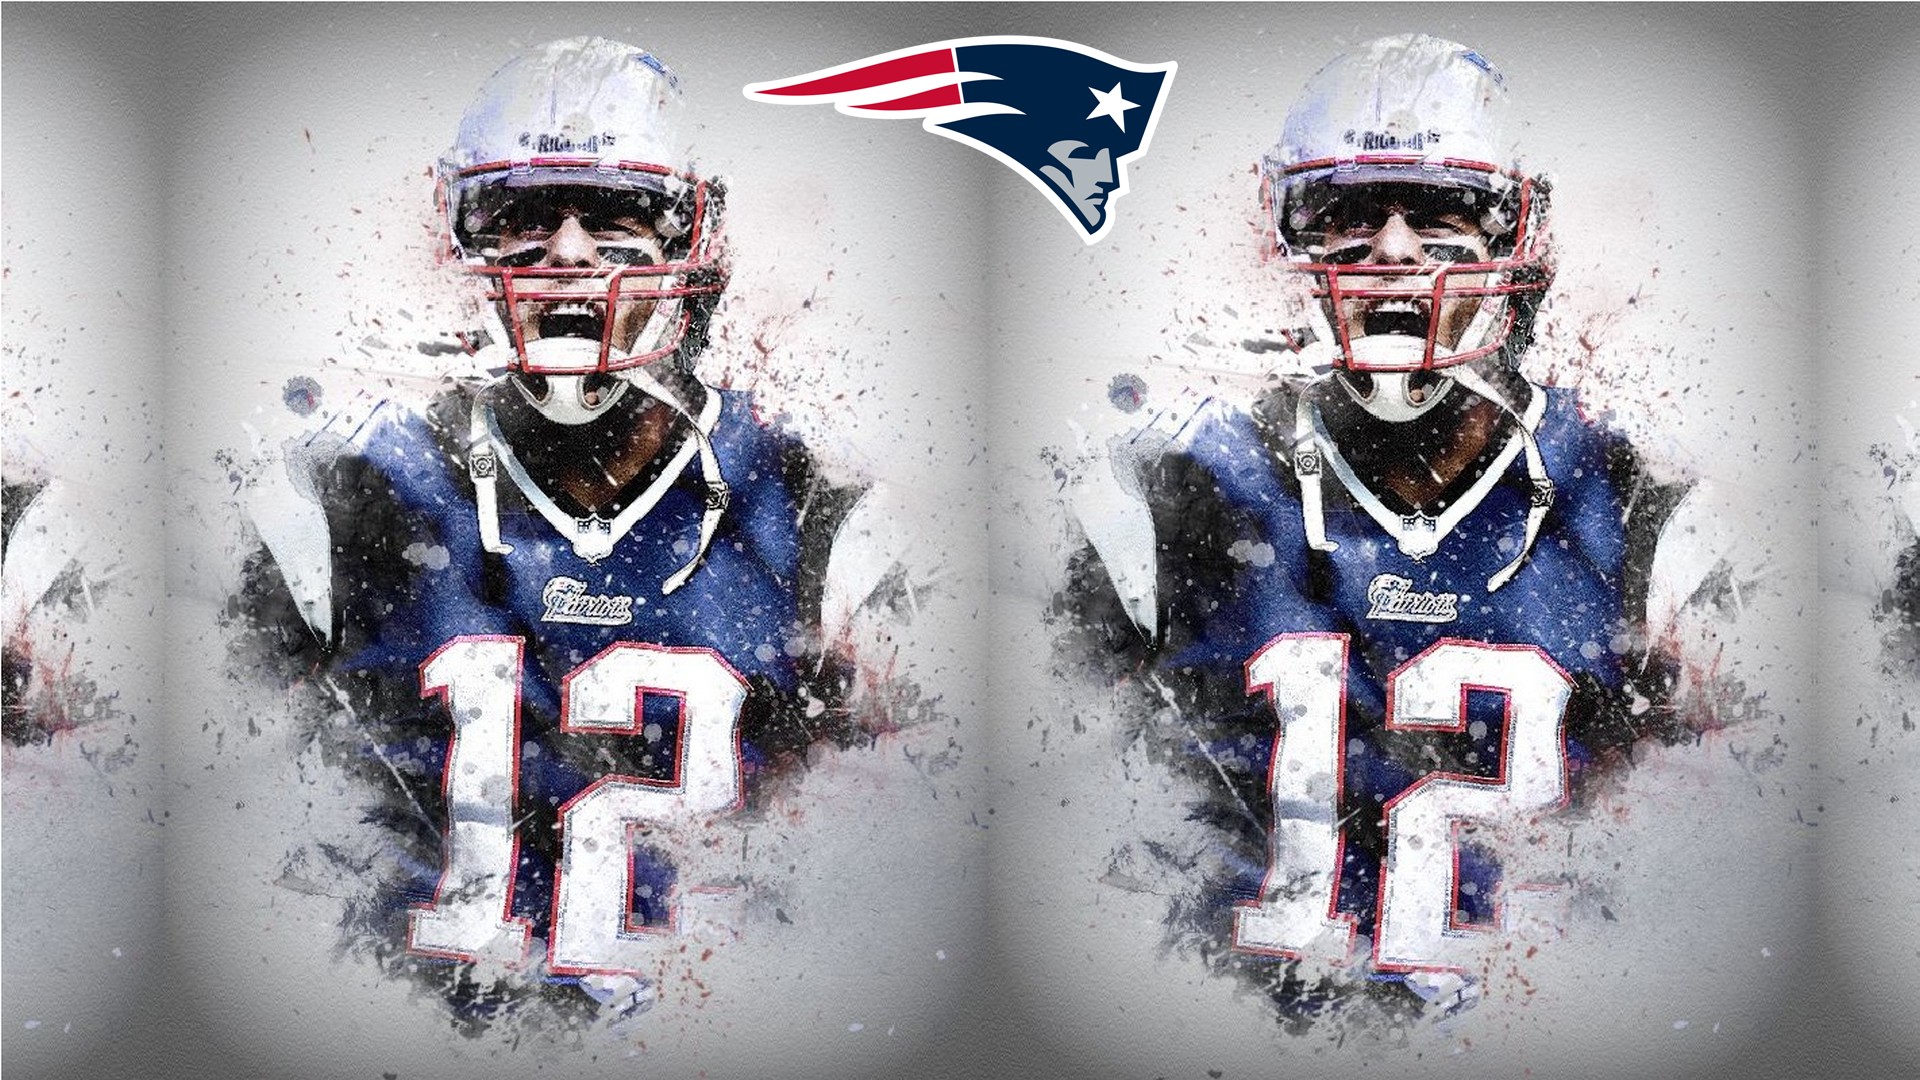 Wallpaper Desktop Tom Brady HD With Resolution 1920X1080 pixel. You can make this wallpaper for your Mac or Windows Desktop Background, iPhone, Android or Tablet and another Smartphone device for free